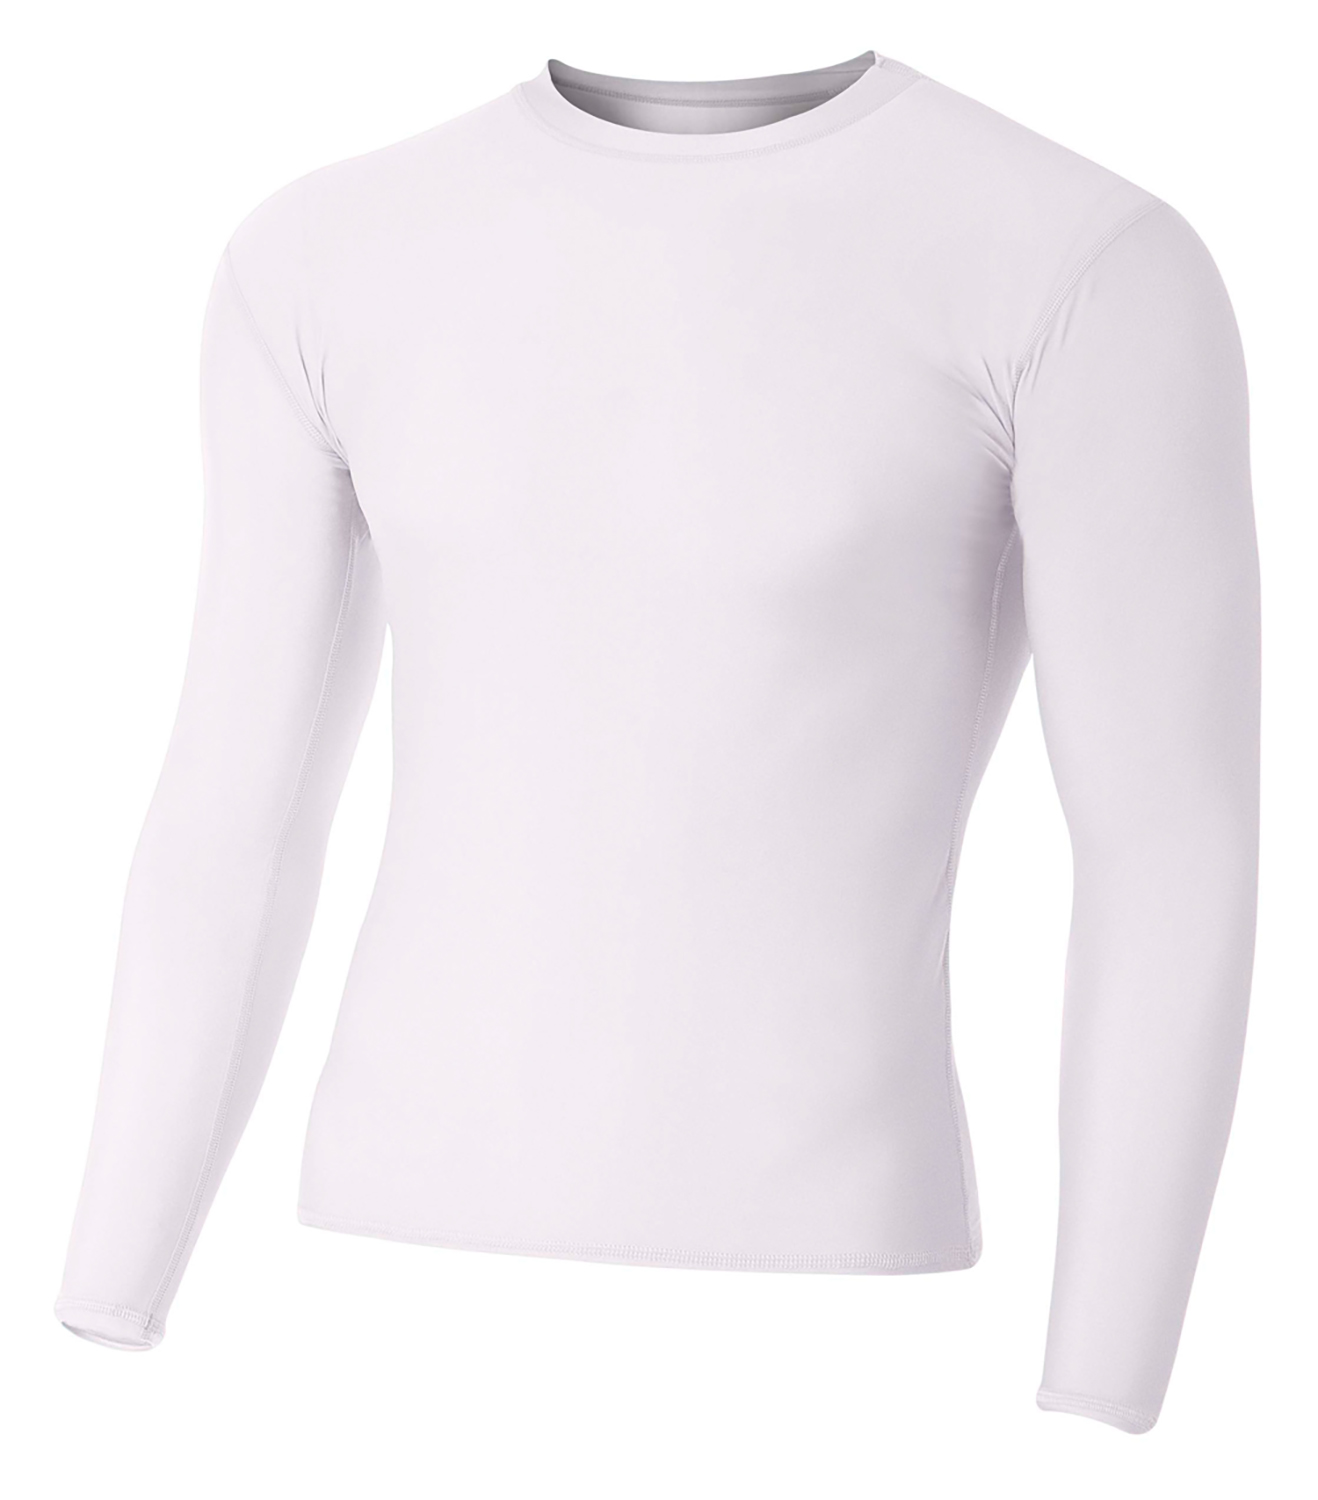 N3133 A4 Adult Polyester Spandex Long Sleeve Compression T-Shirt